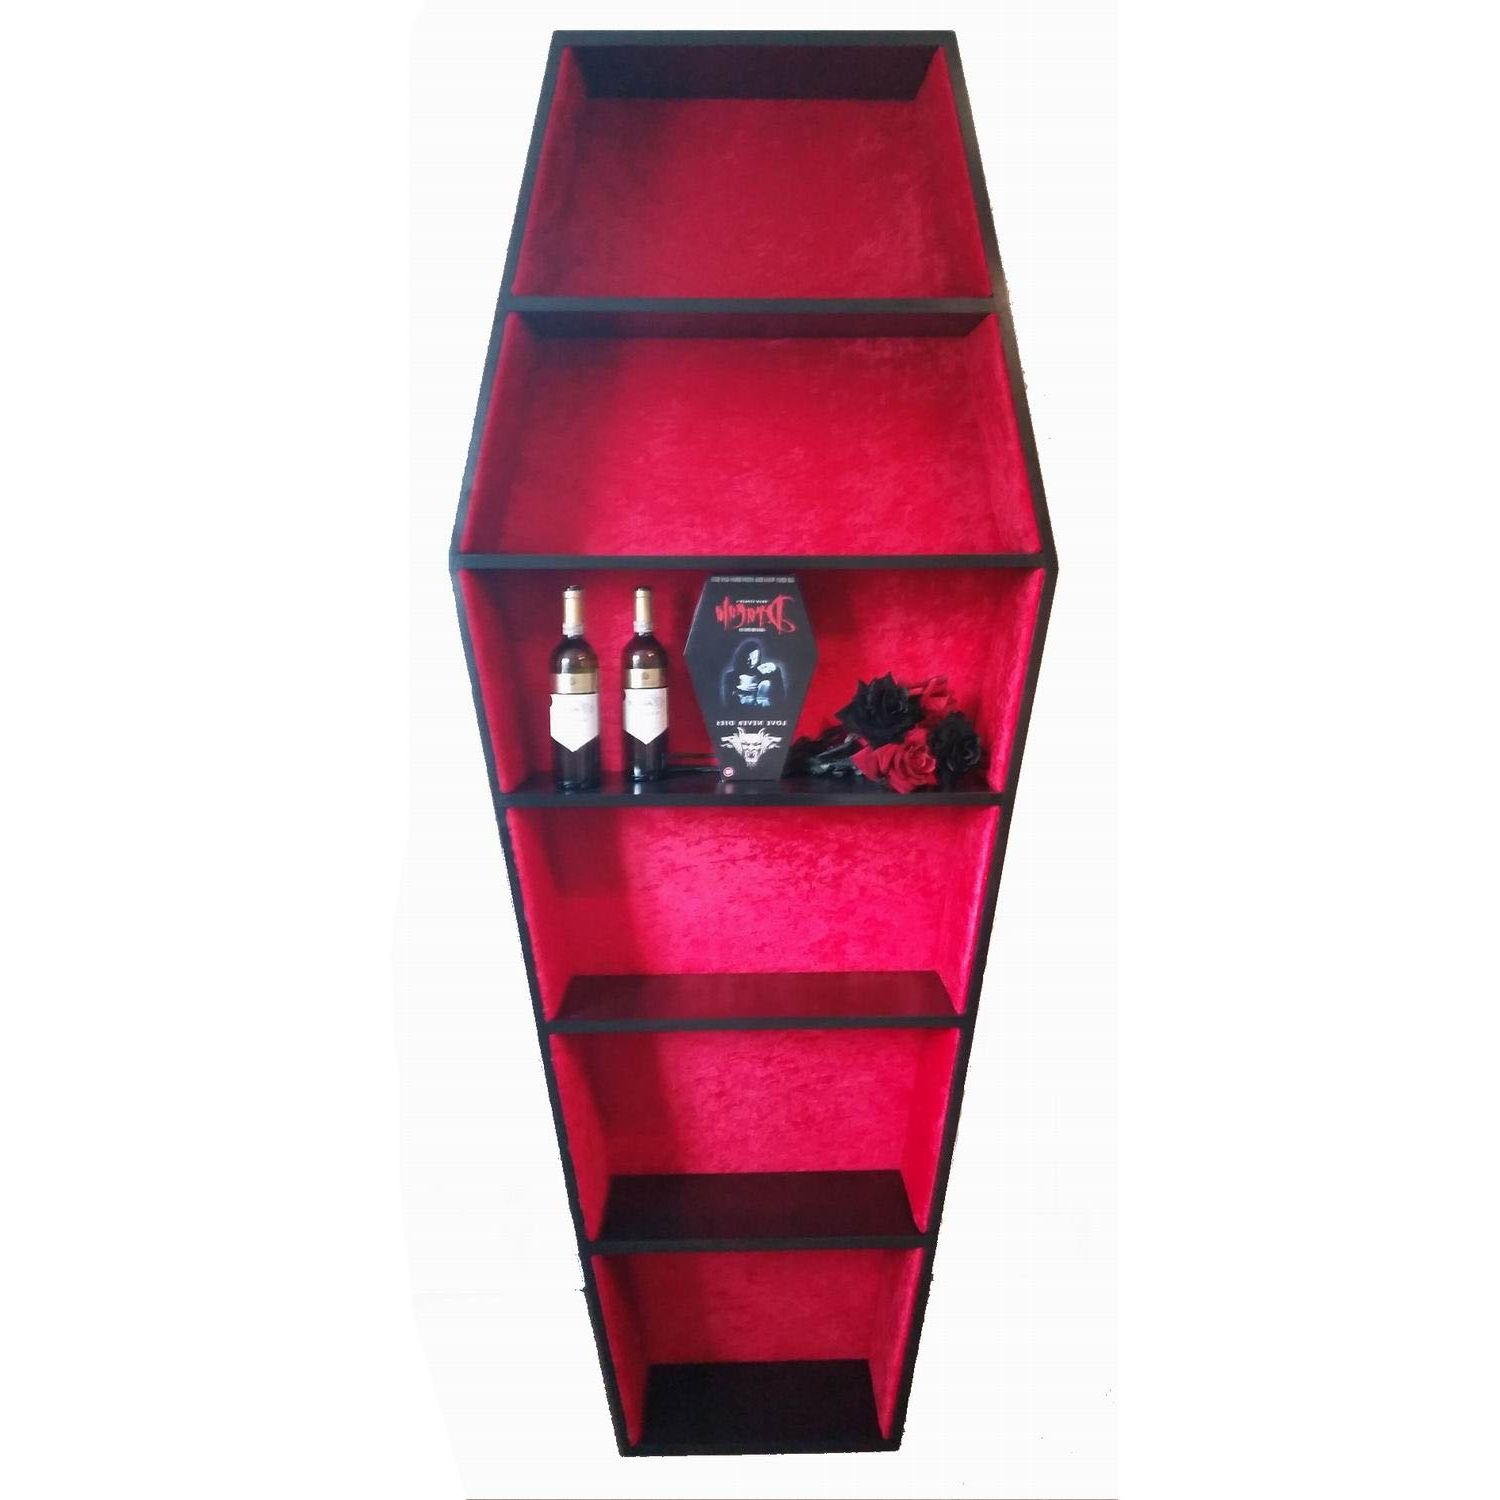 Furniture Home: Furniture Home Coffin Bookcase Black With Red With Best And Newest Coffin Bookcases (View 12 of 15)